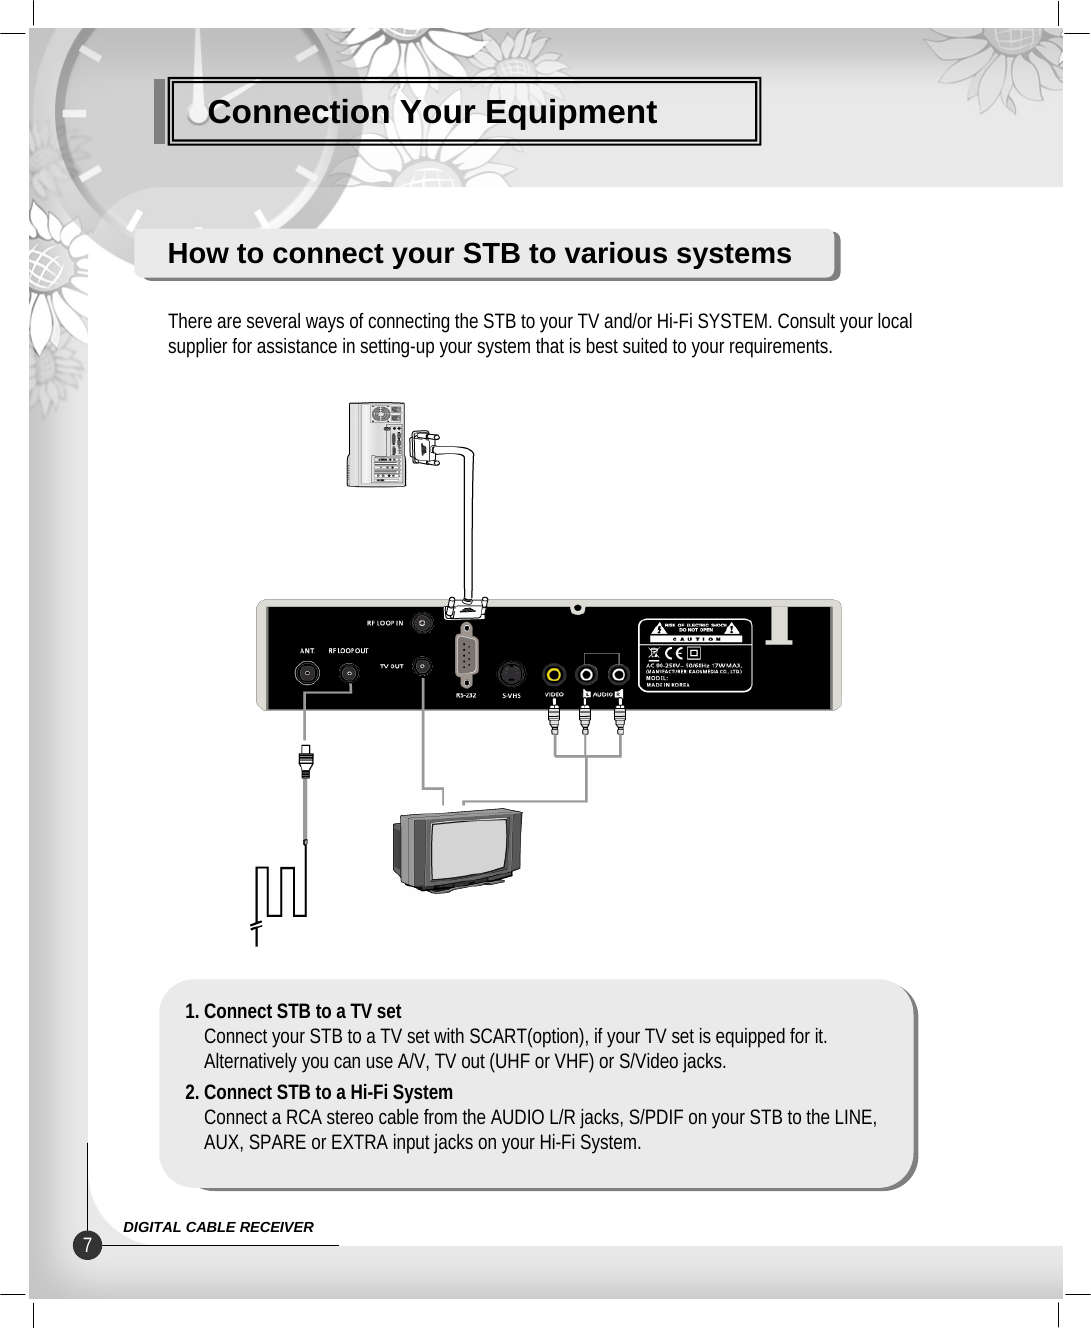 Connection Your Equipment7DIGITAL CABLE RECEIVERHow to connect your STB to various systemsThere are several ways of connecting the STB to your TV and/or Hi-Fi SYSTEM. Consult your localsupplier for assistance in setting-up your system that is best suited to your requirements. 1. Connect STB to a TV setConnect your STB to a TV set with SCART(option), if your TV set is equipped for it.Alternatively you can use A/V, TV out (UHF or VHF) or S/Video jacks.2. Connect STB to a Hi-Fi SystemConnect a RCA stereo cable from the AUDIO L/R jacks, S/PDIF on your STB to the LINE,AUX, SPARE or EXTRA input jacks on your Hi-Fi System.